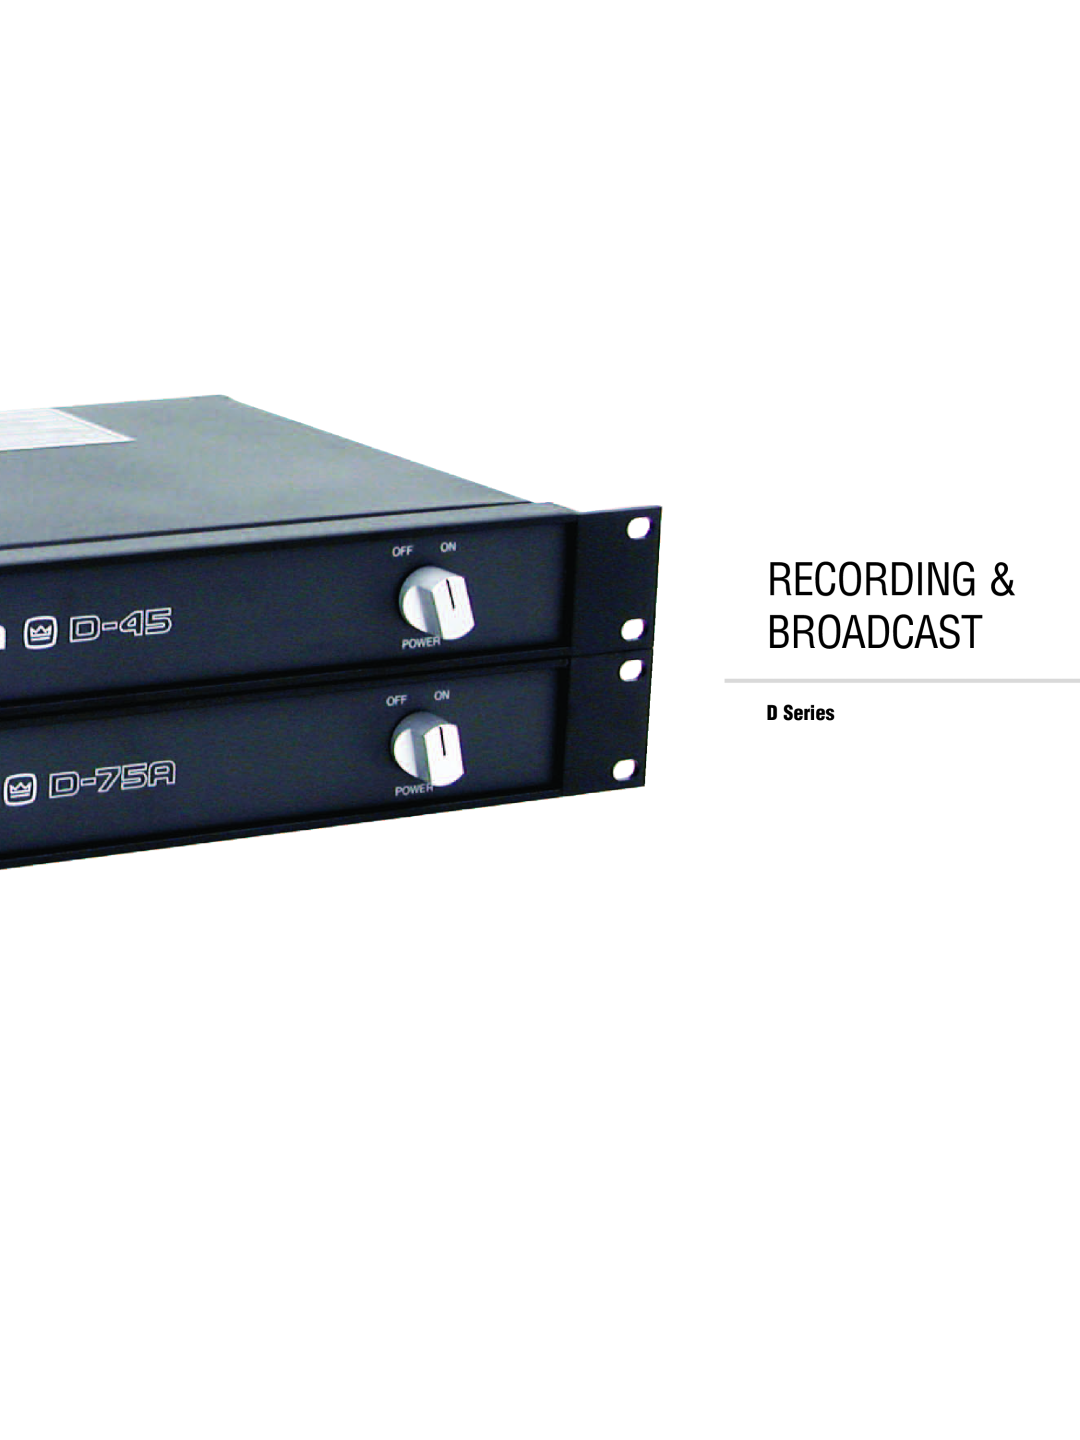 Crown CTS 2000, CTS 3000, CTS 1200, CTS 600 manual Recording & Broadcast, D Series 